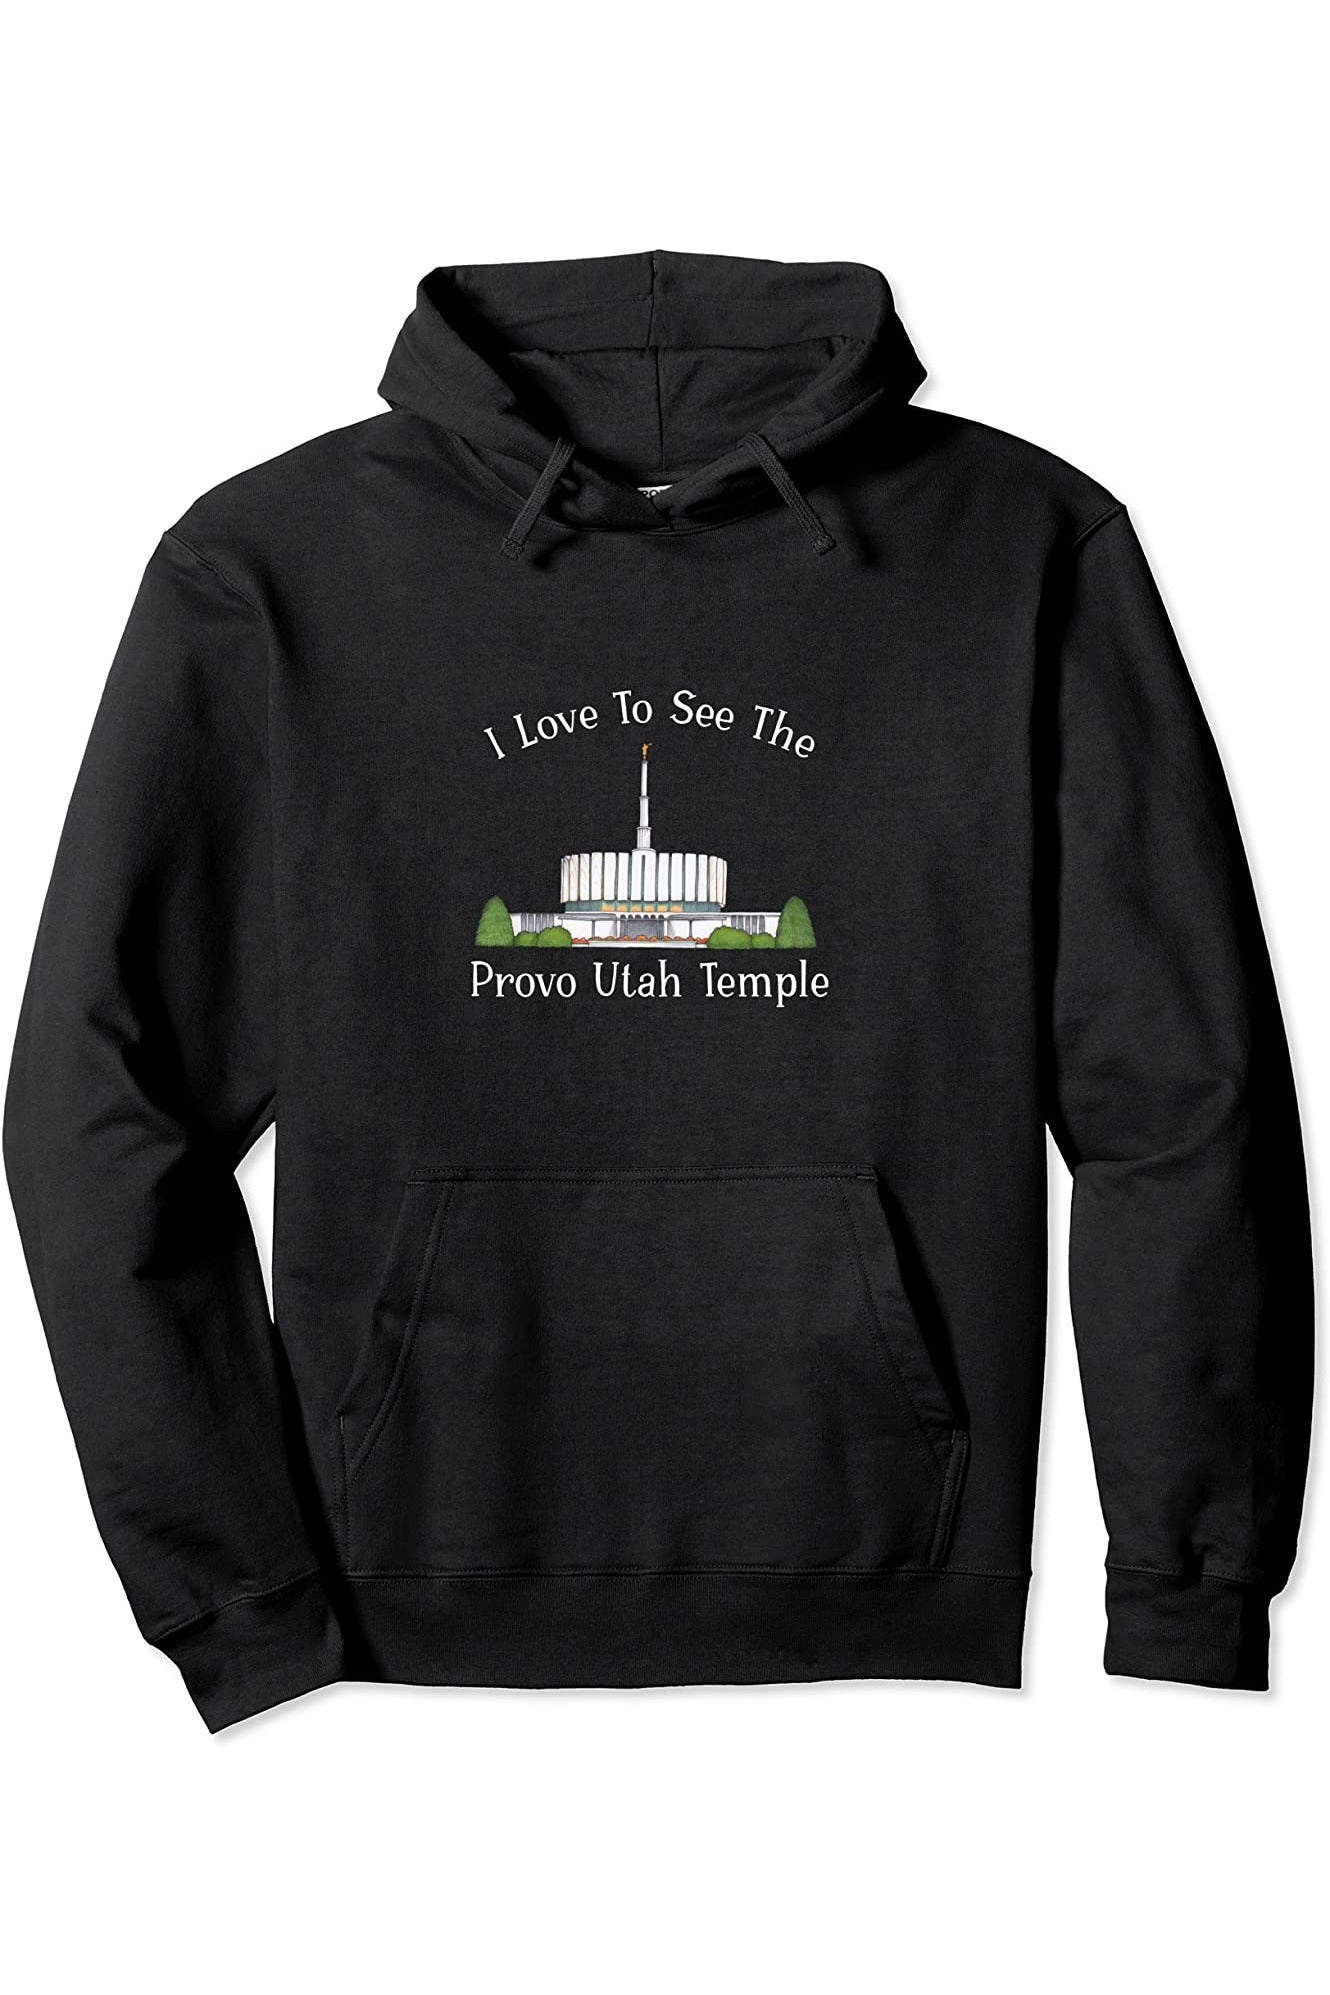 Provo Utah Temple Pullover Hoodie - Happy Style (English) US